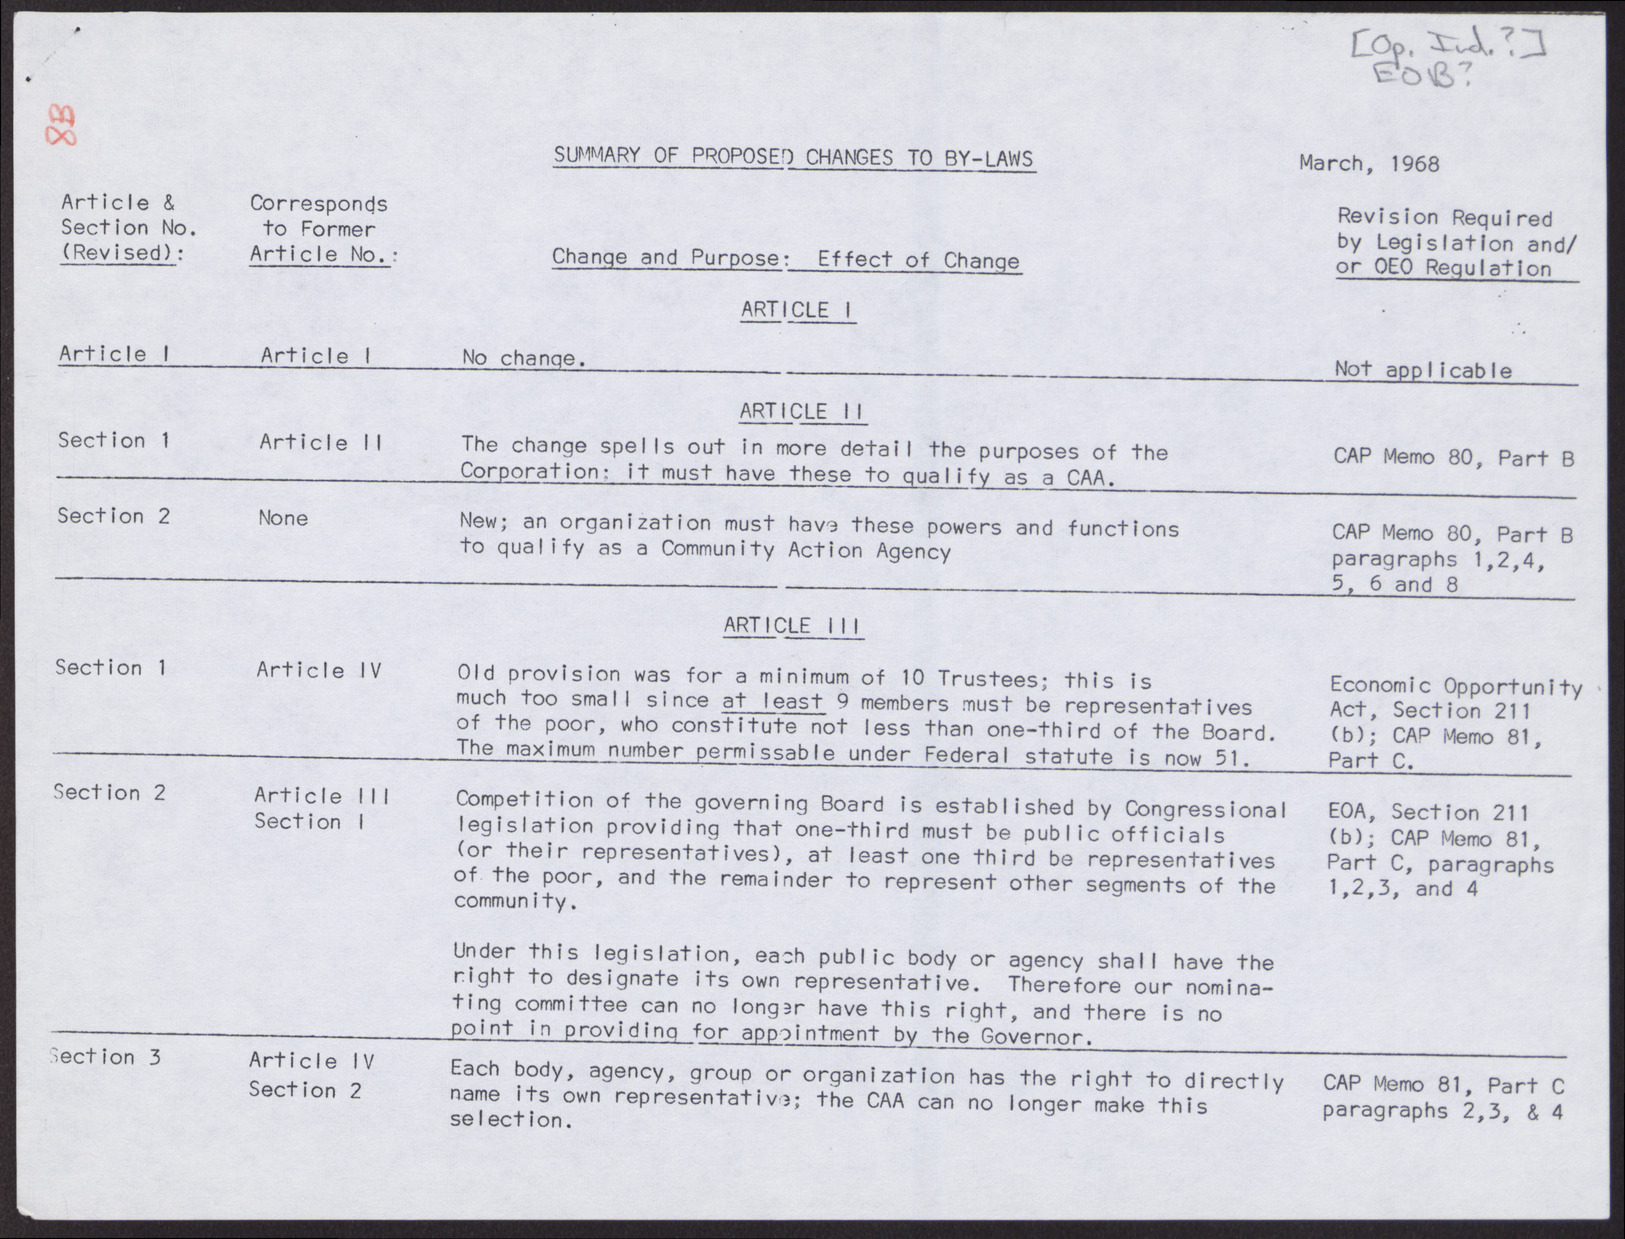 Summary of Proposed Changes to By-Laws (5 pages), March 1968